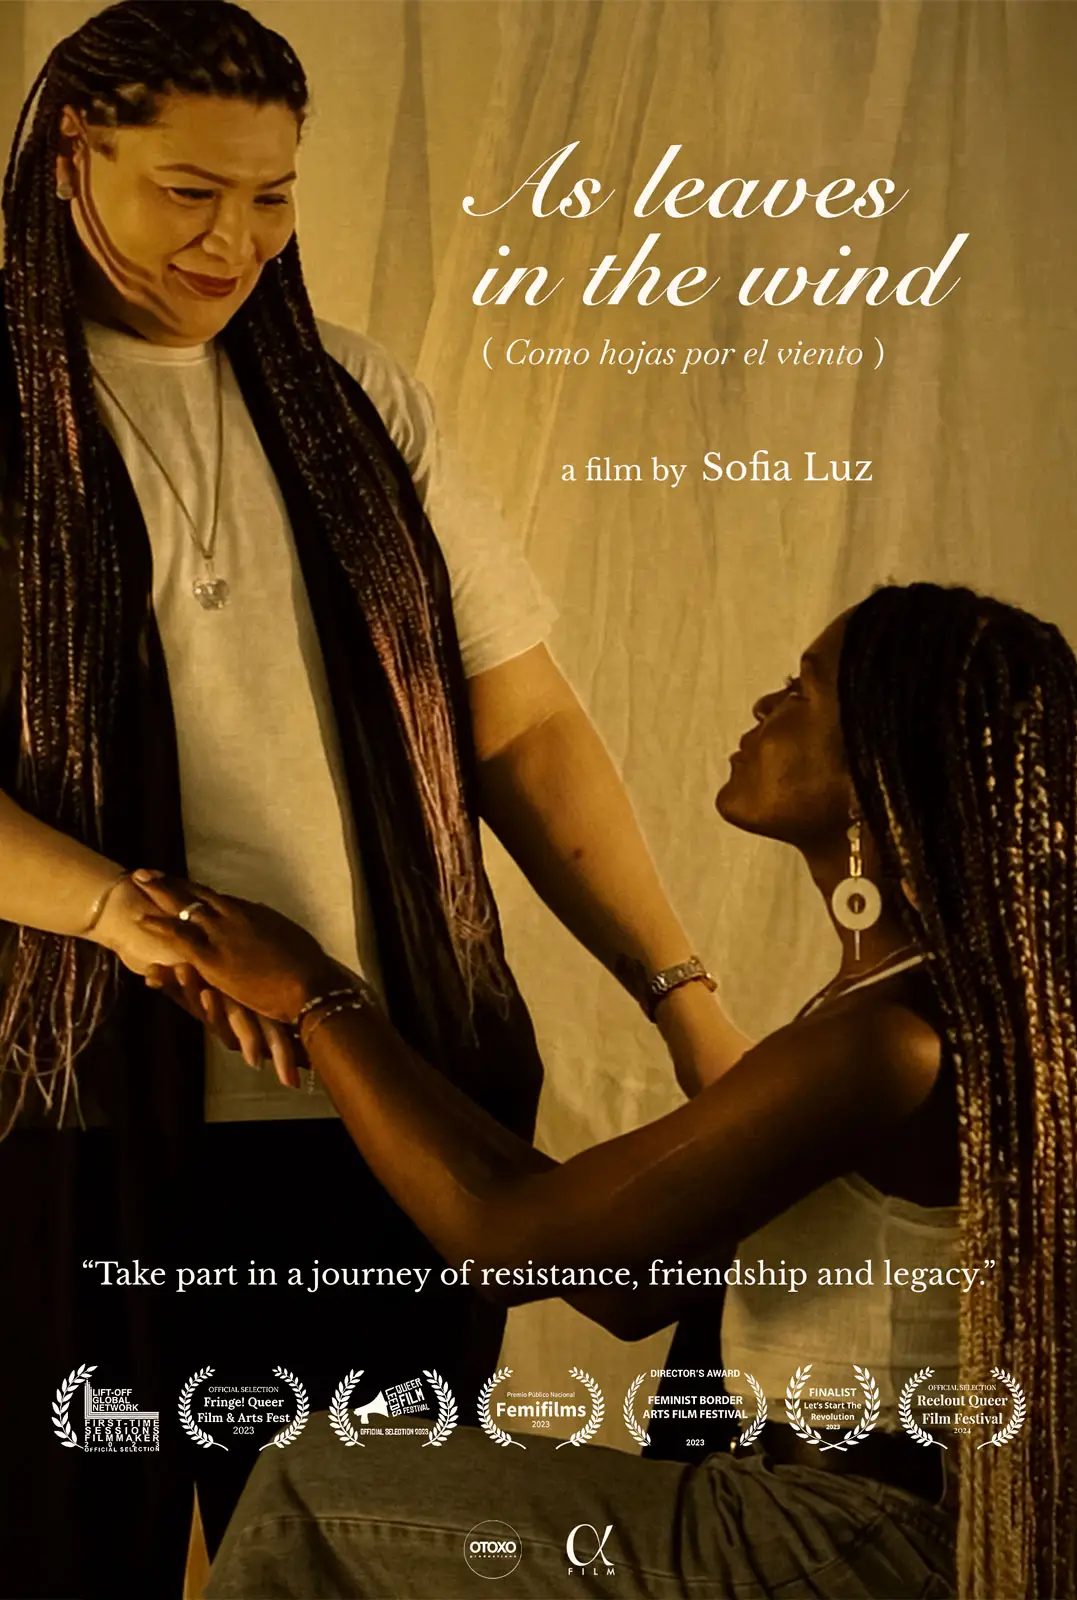 Poster of the short documentary "As leaves in the wind" by Sofia Luz